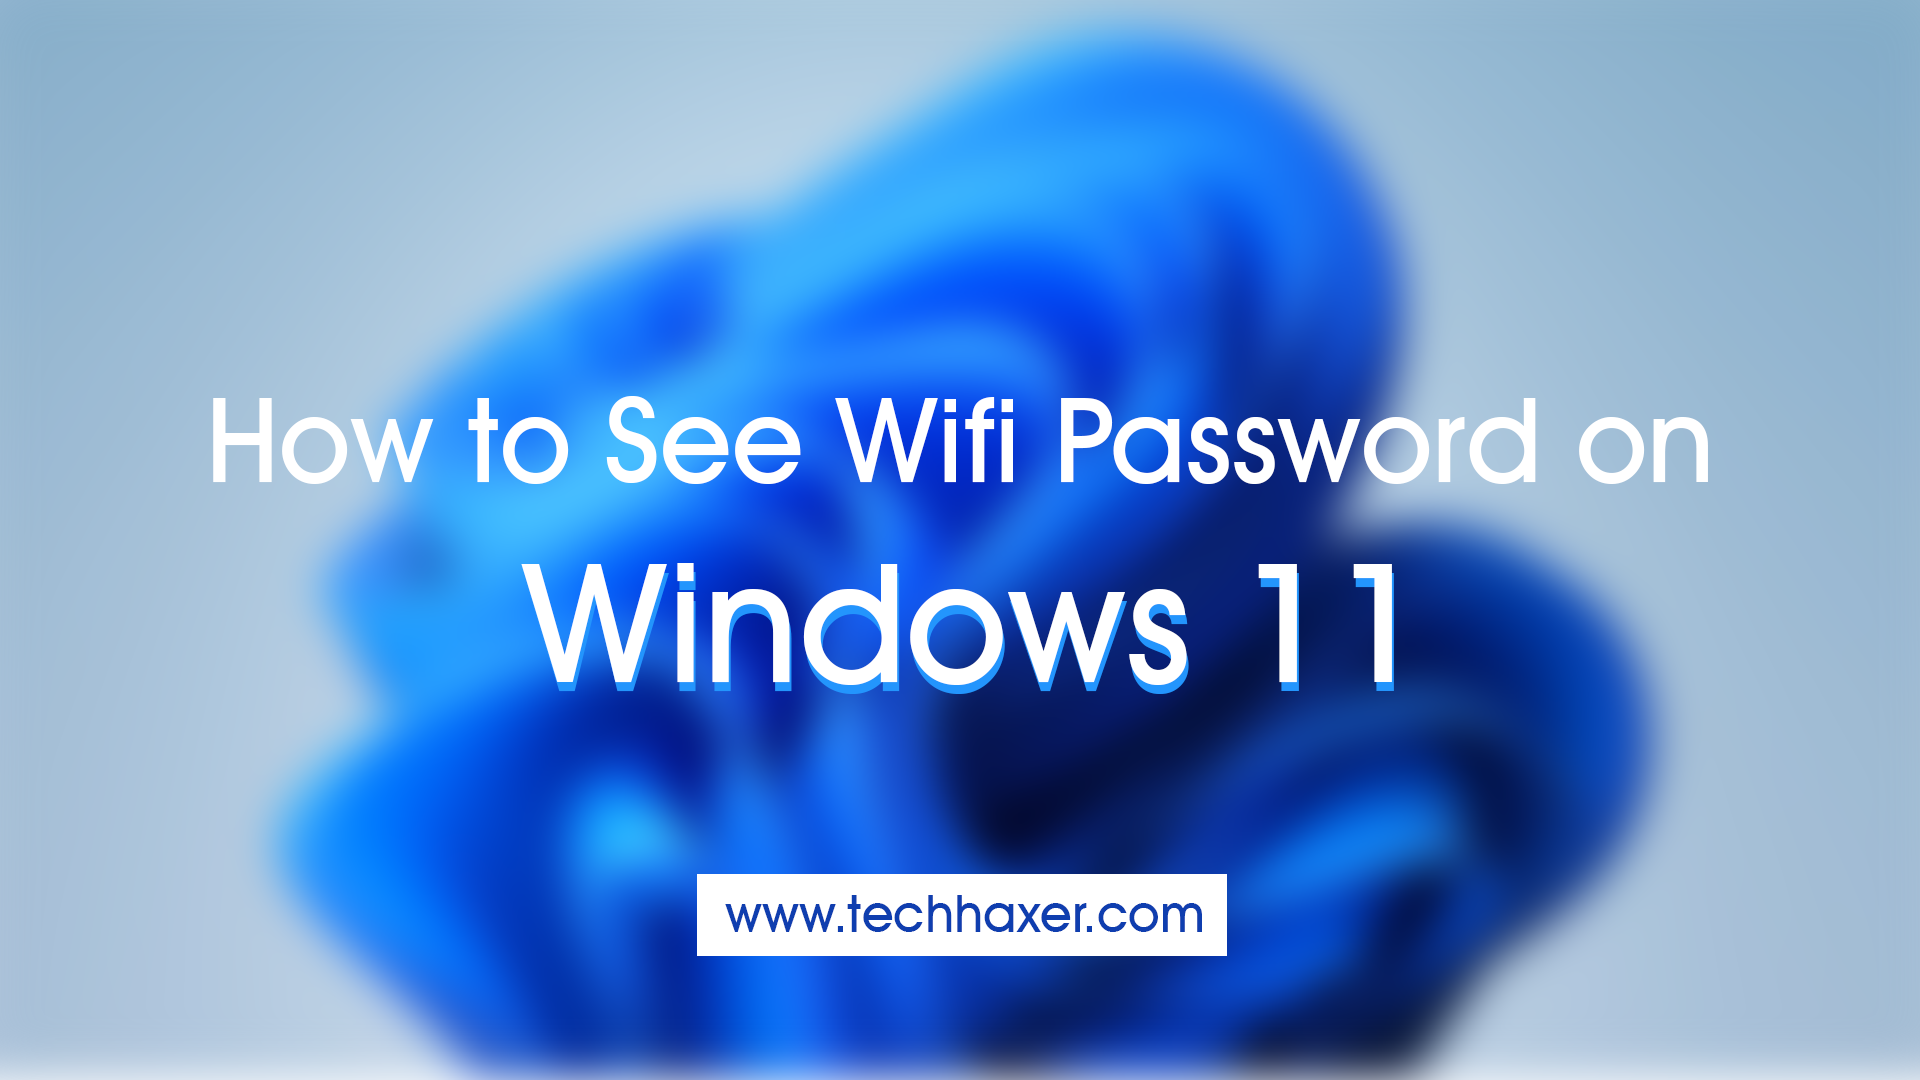 How to See Wifi Passwords on Windows 11